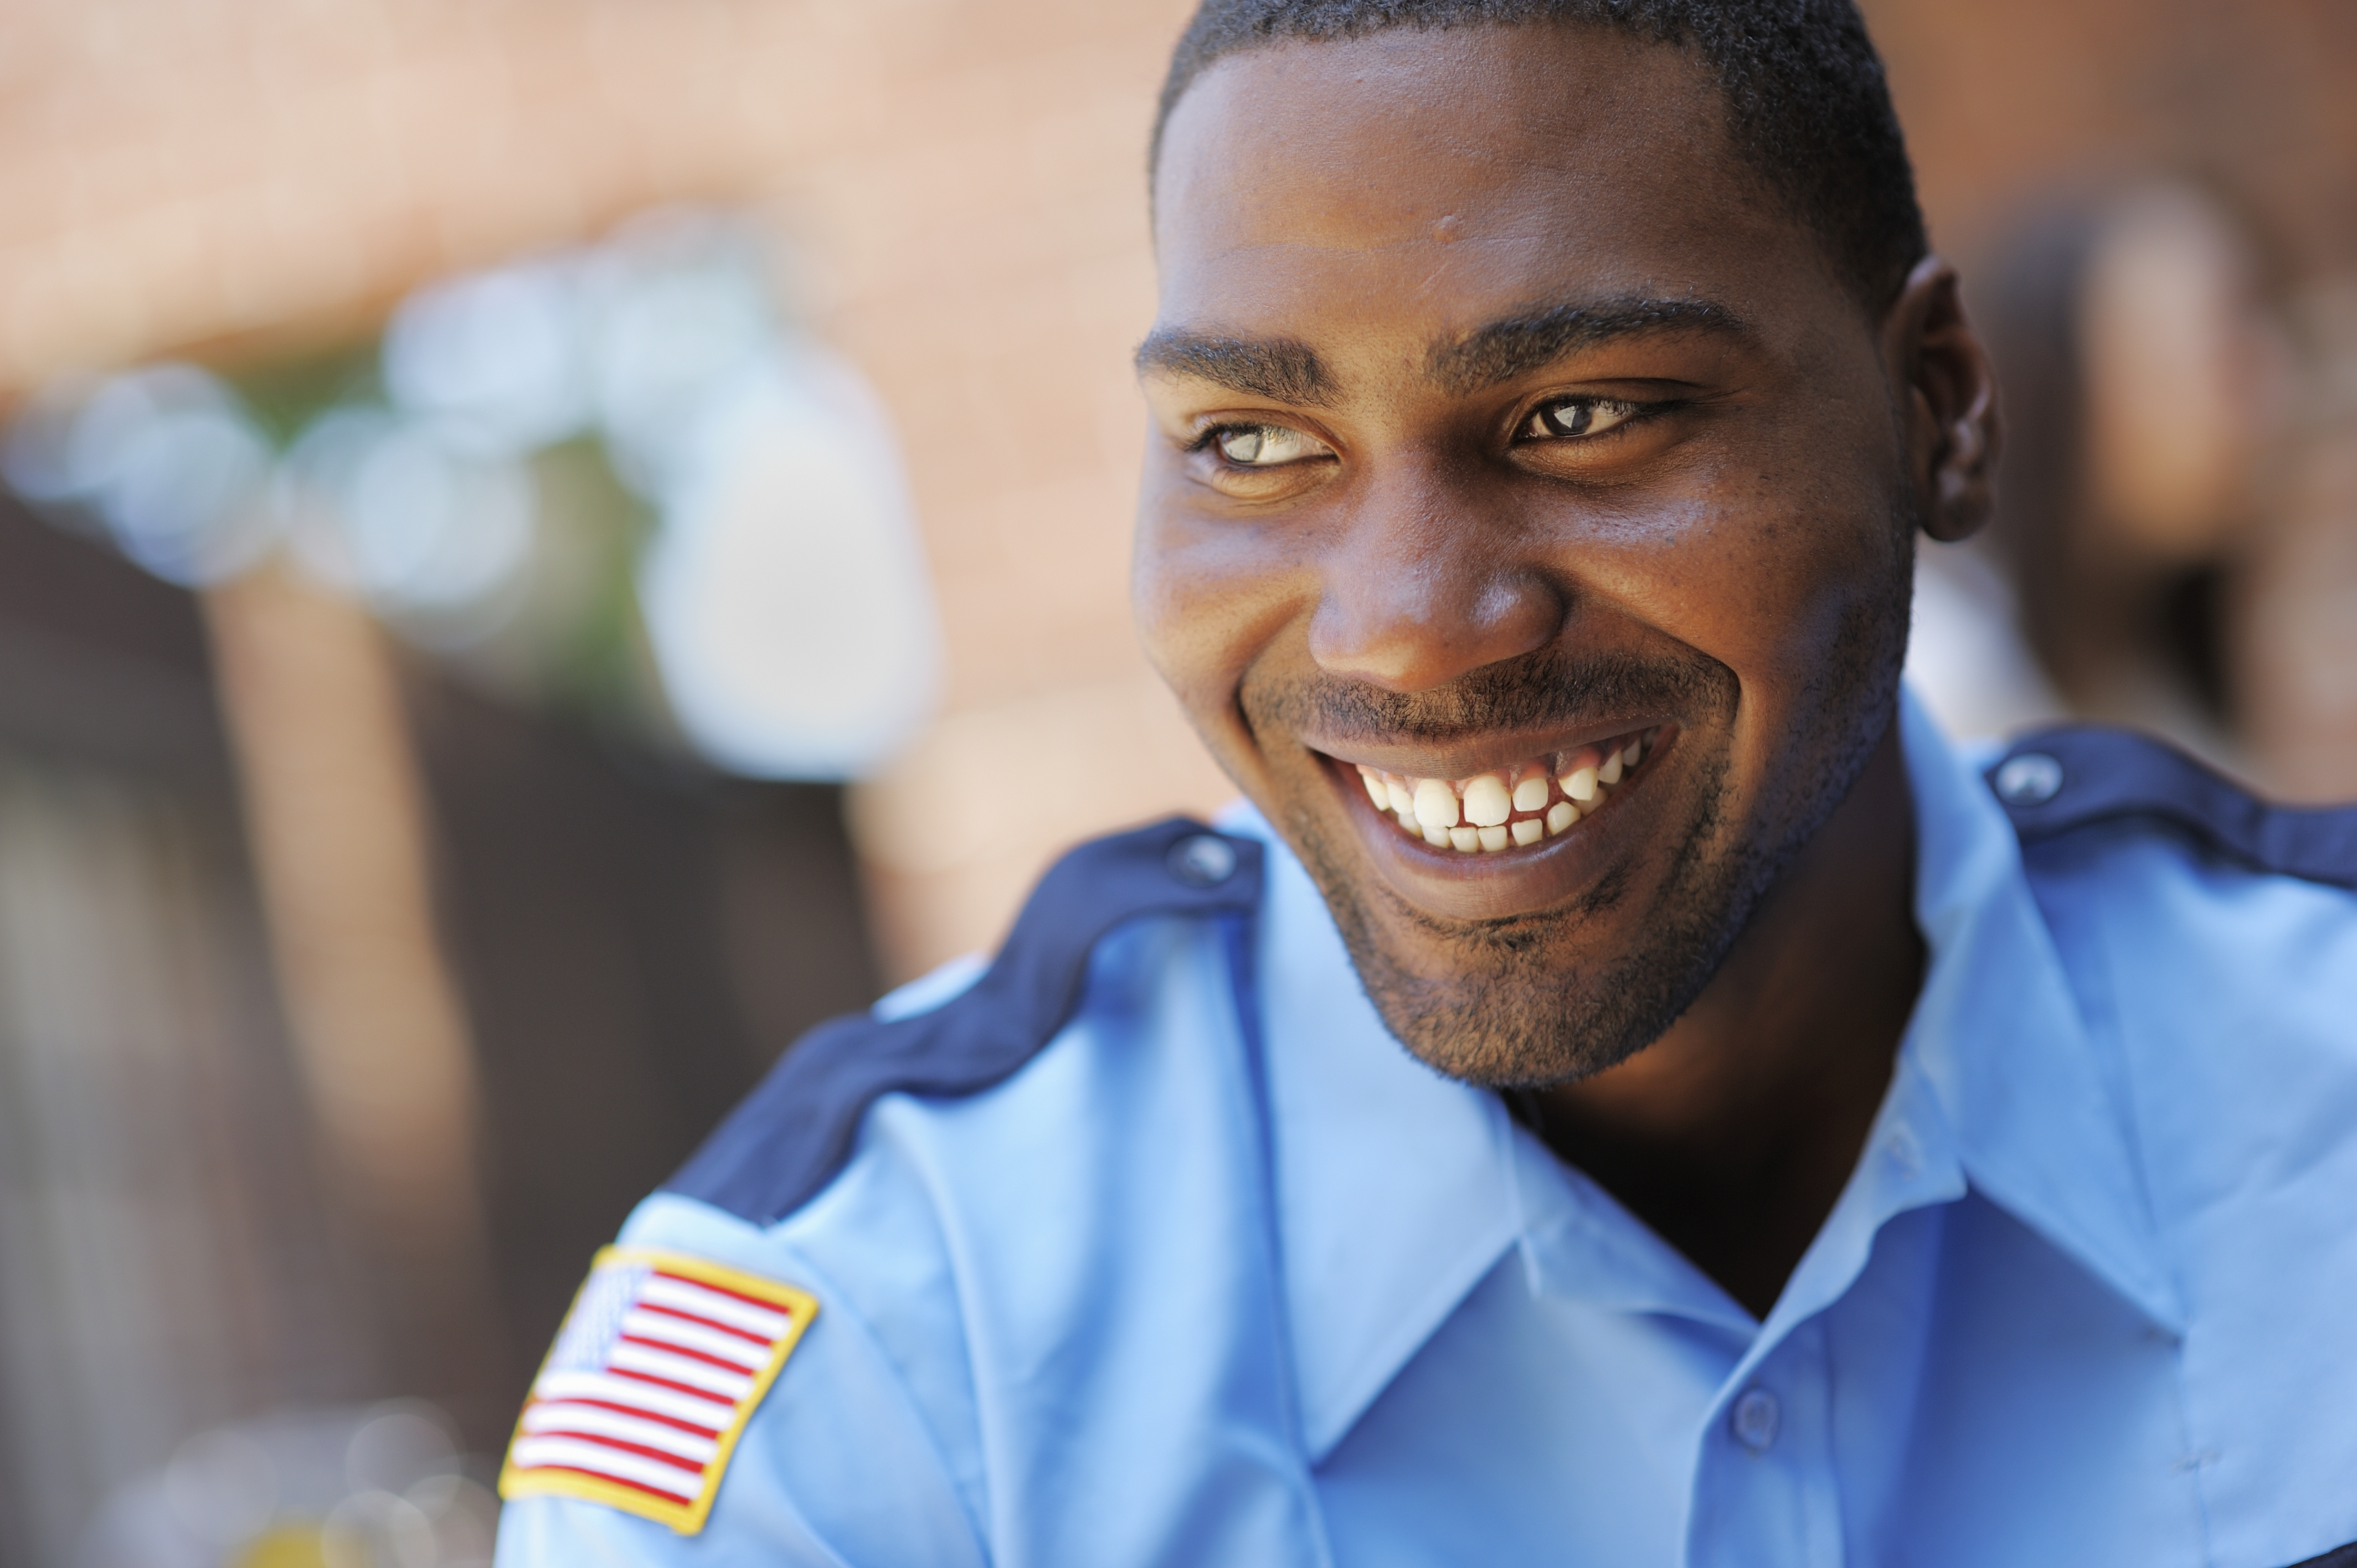 An American security or police officer smiling and happy.